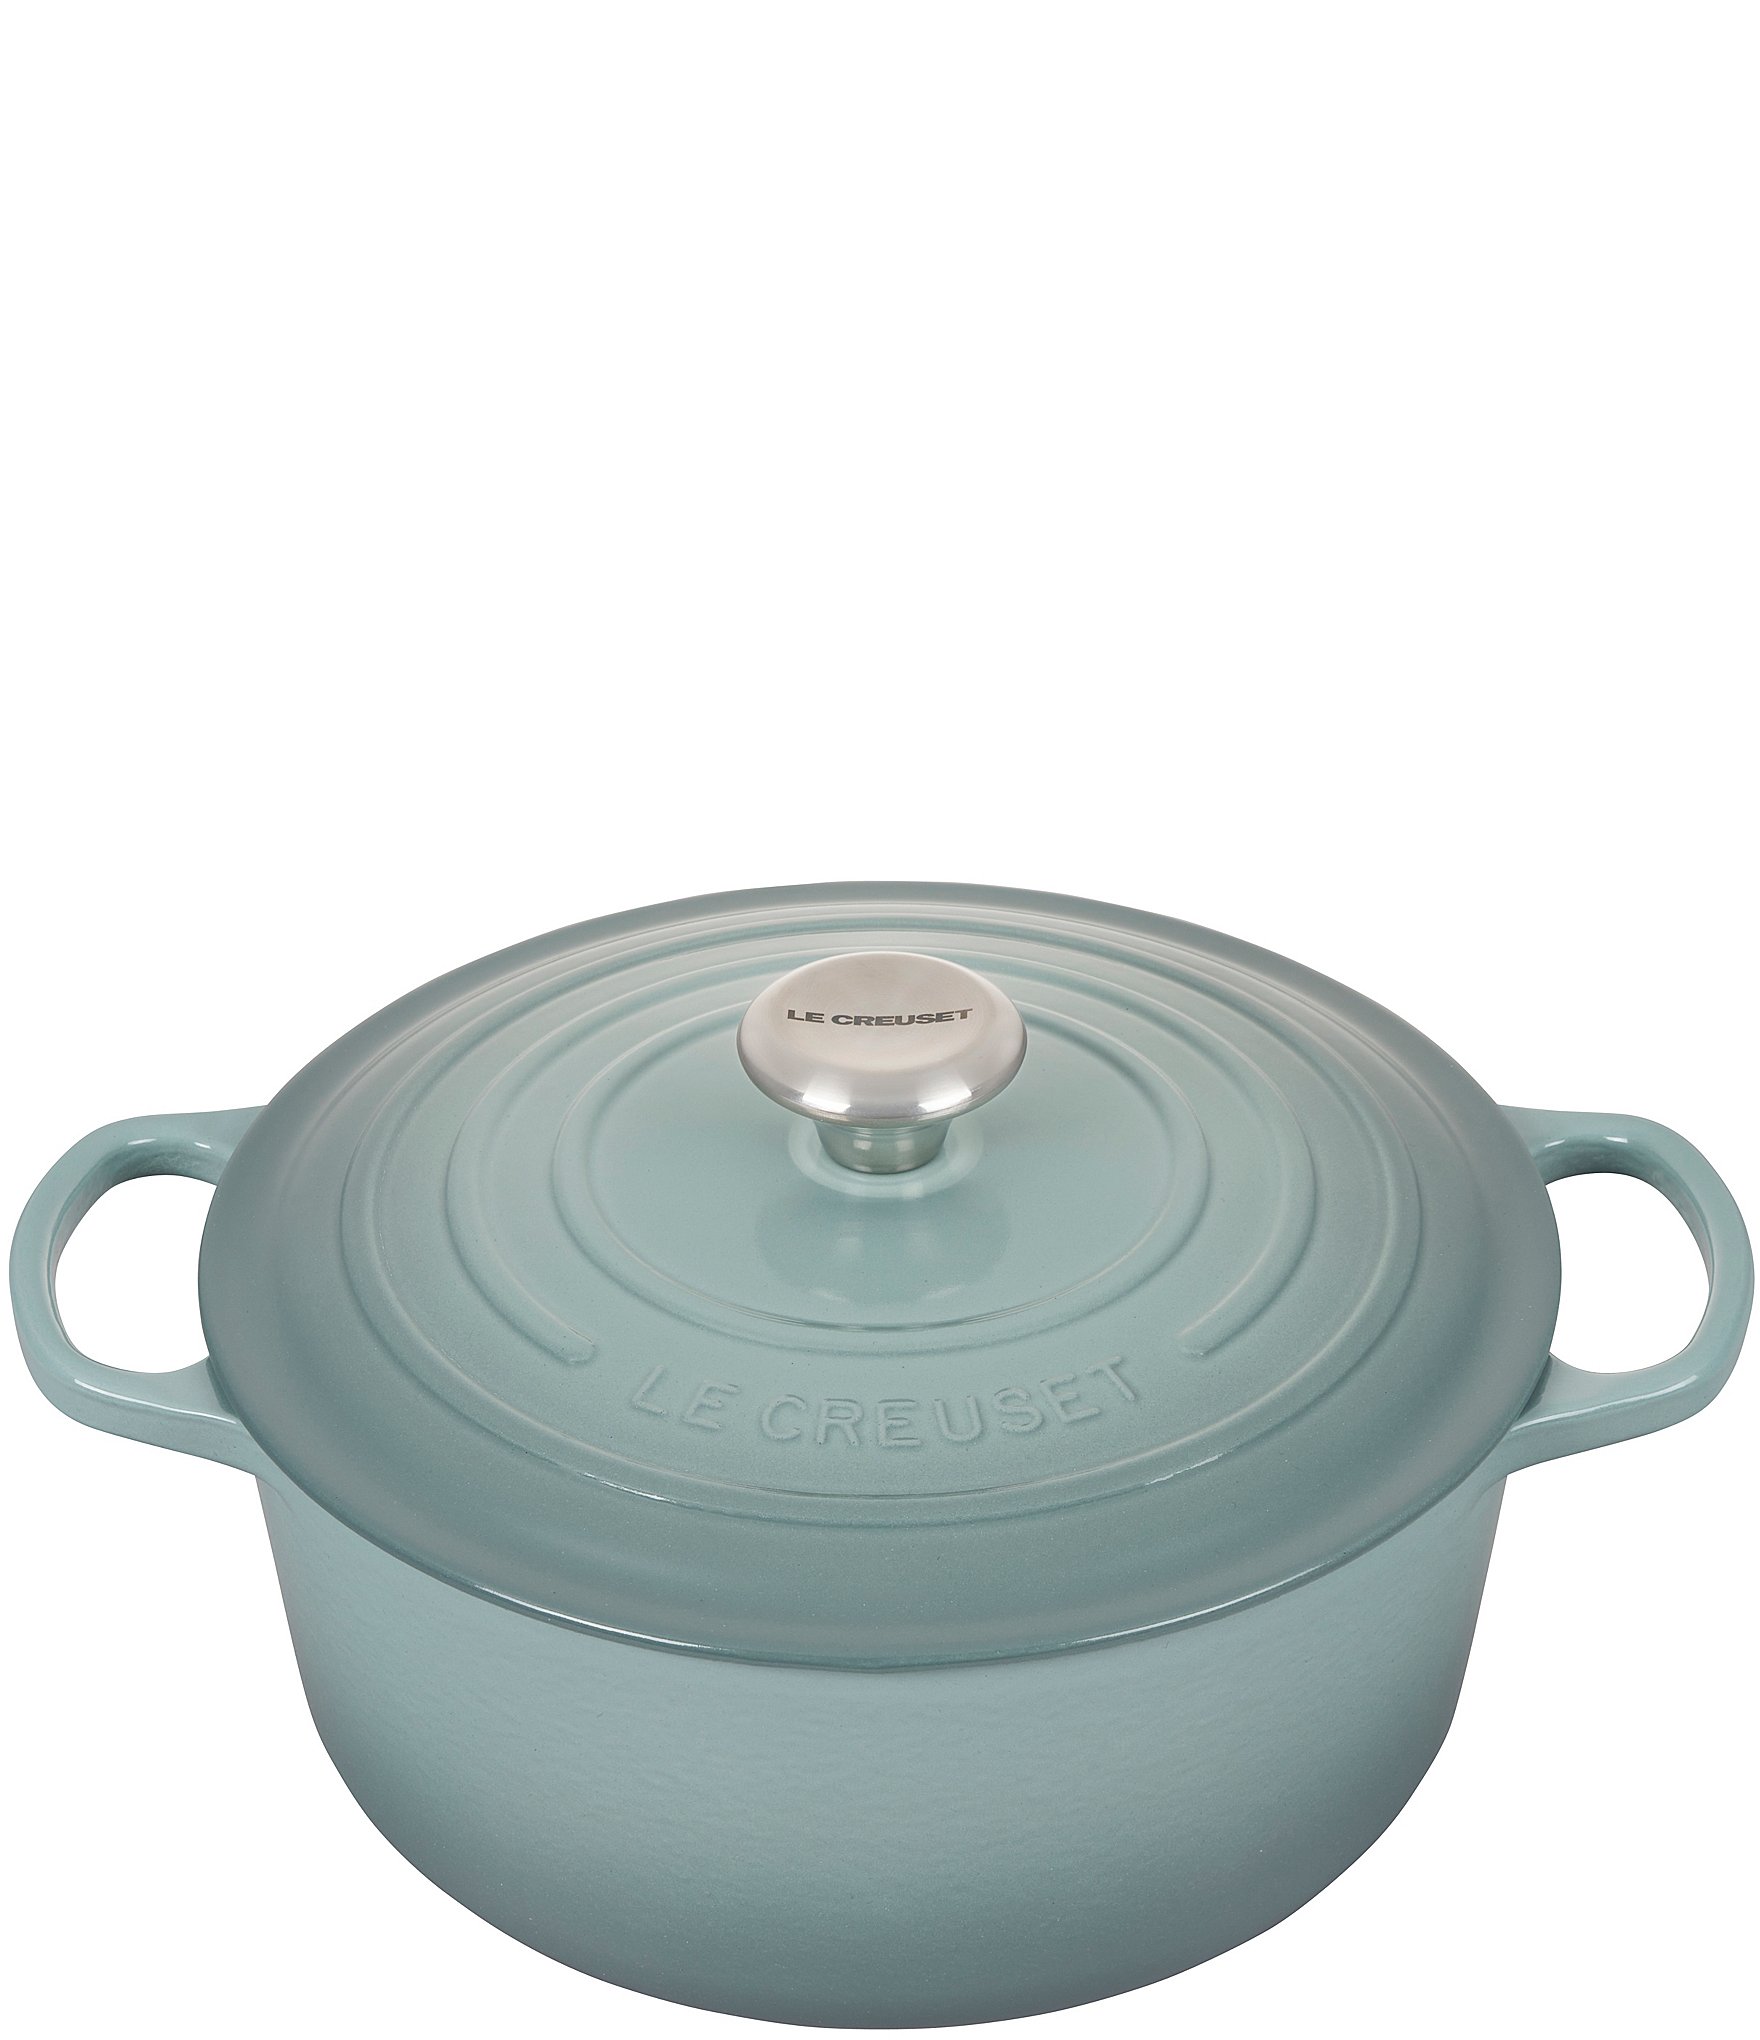 https://dimg.dillards.com/is/image/DillardsZoom/zoom/le-creuset-signature-5.5-qt.-round-enameled-cast-iron-dutch-oven-with-stainless-steel-knob-sea-salt/00000001_zi_9ace6585-9a78-4017-9ae7-a69b9df15ce9.jpg